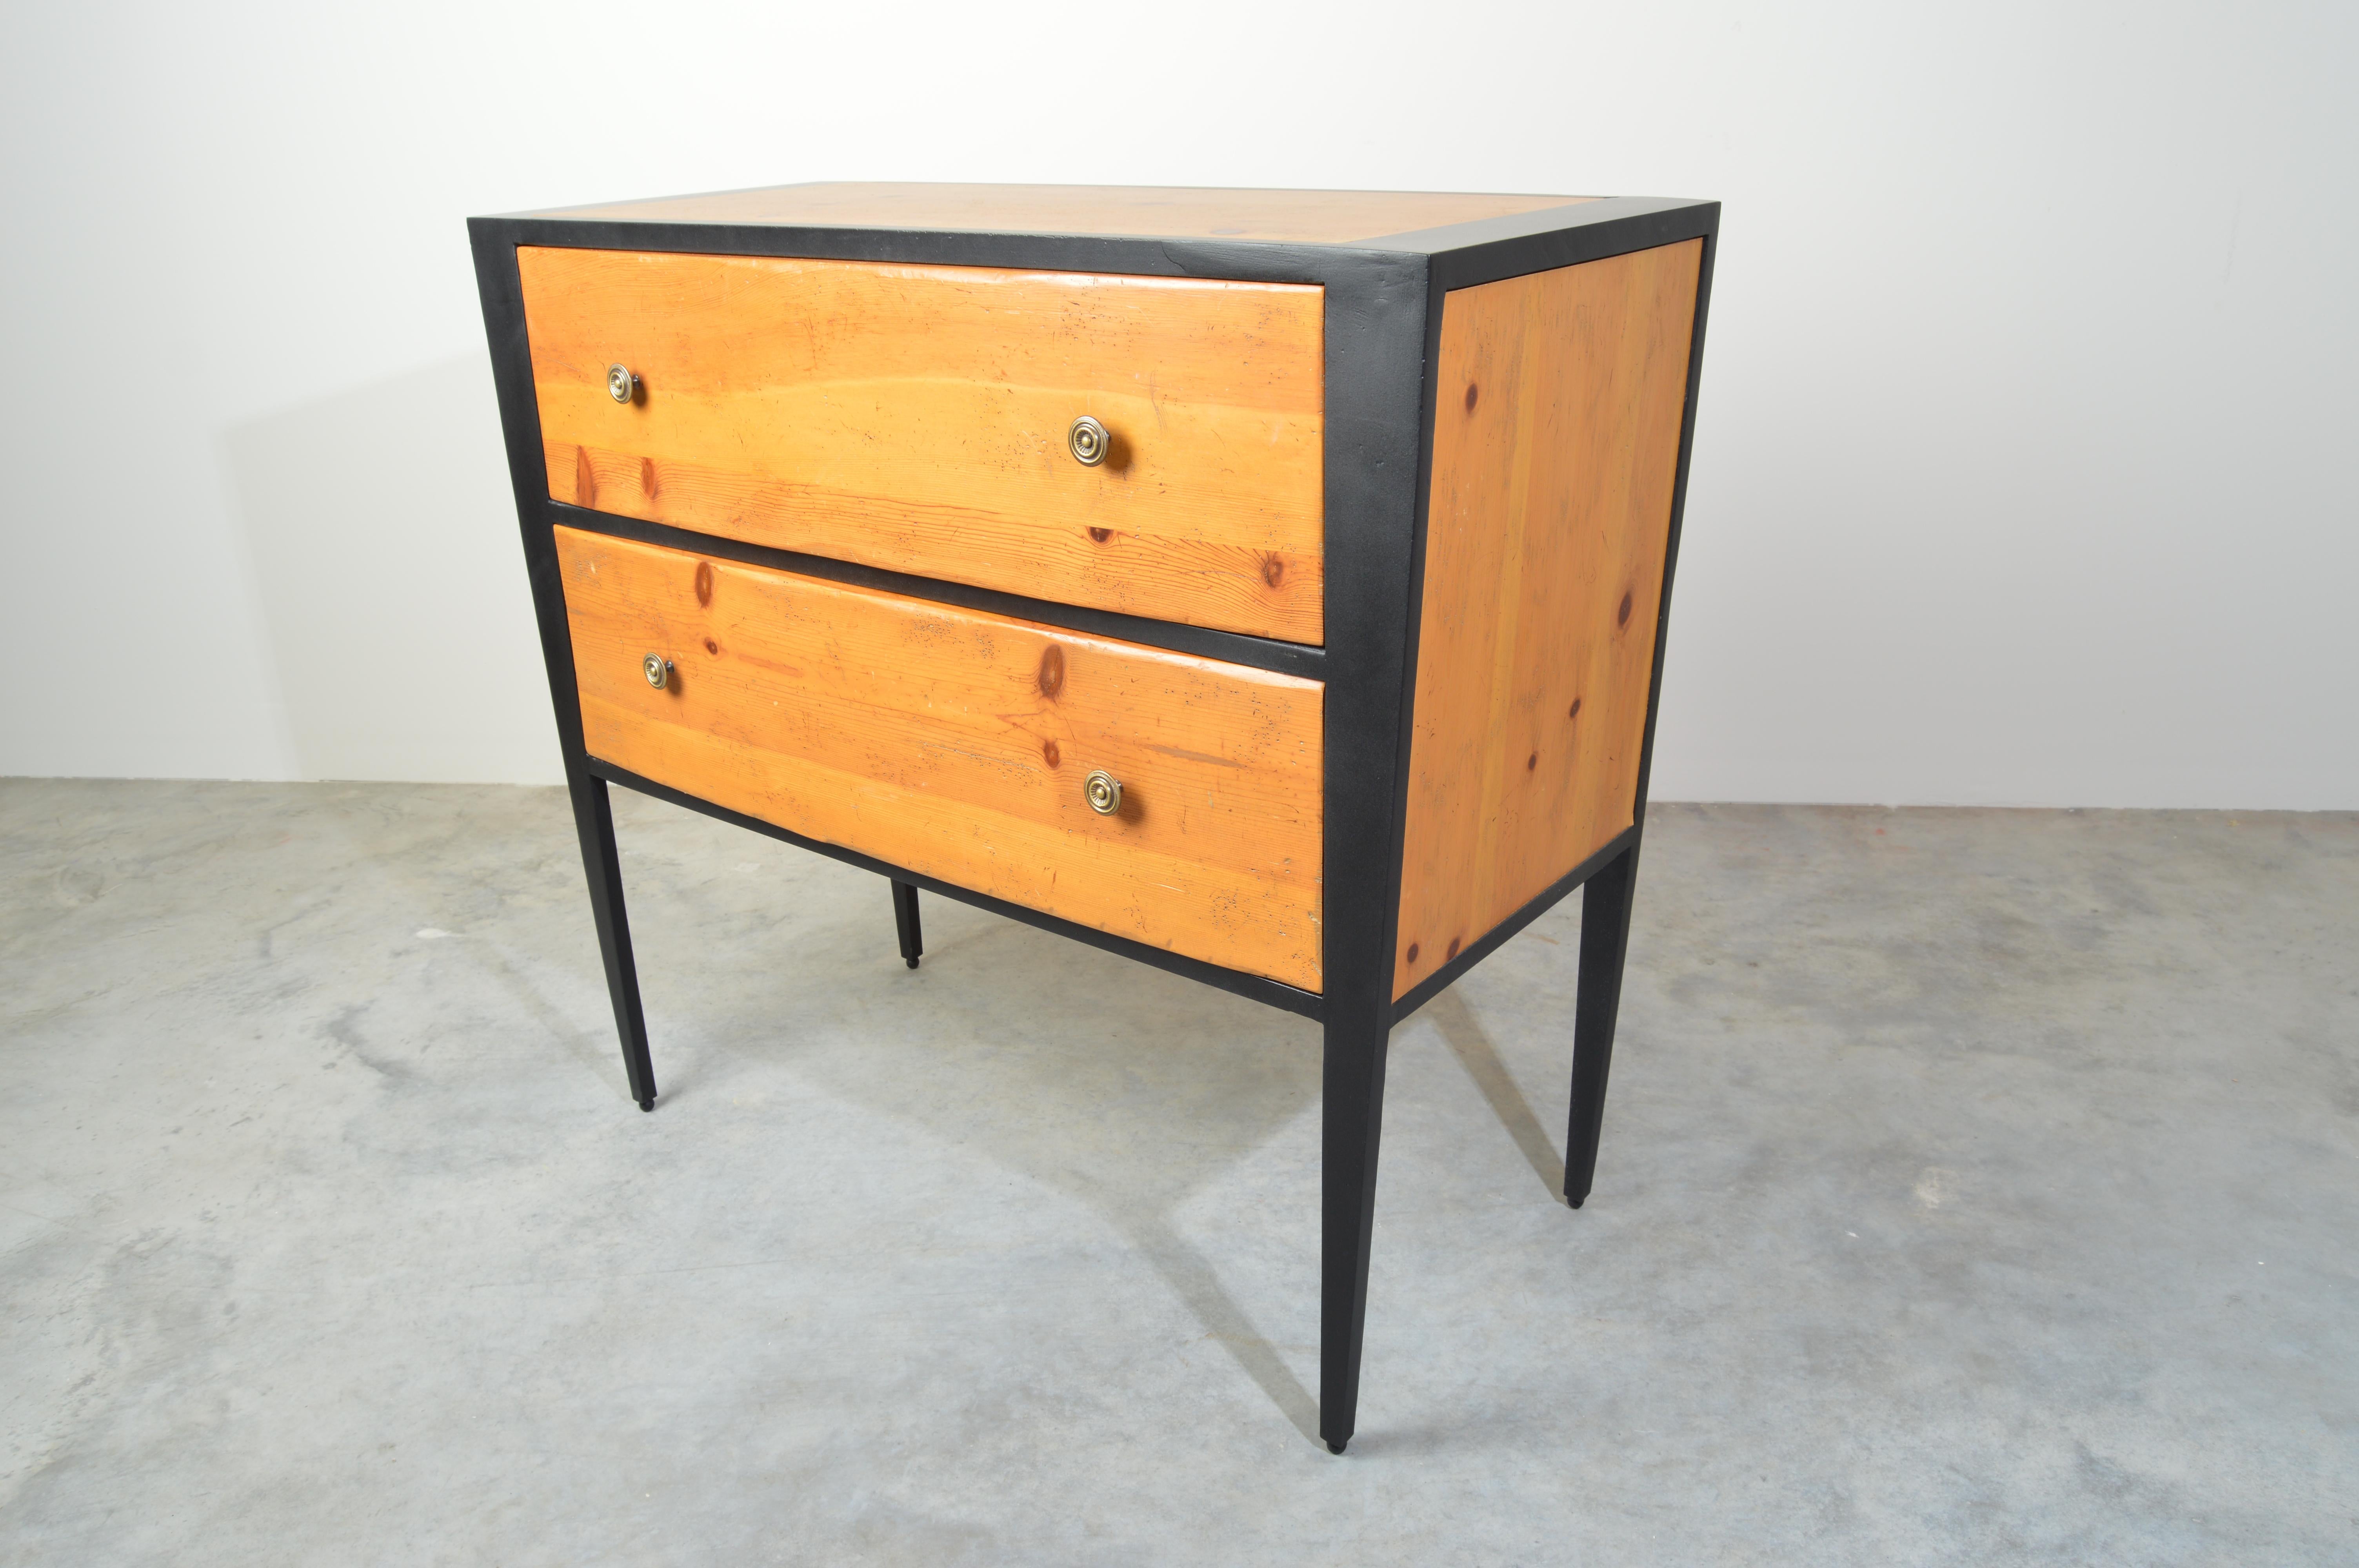 An attractive blend of modern Industrial and Classic American design having a lacquered steel frame with wormwood pine drawers and top. Original label inside the top drawer. 
 Beautiful overall condition. Clean and ready for use.